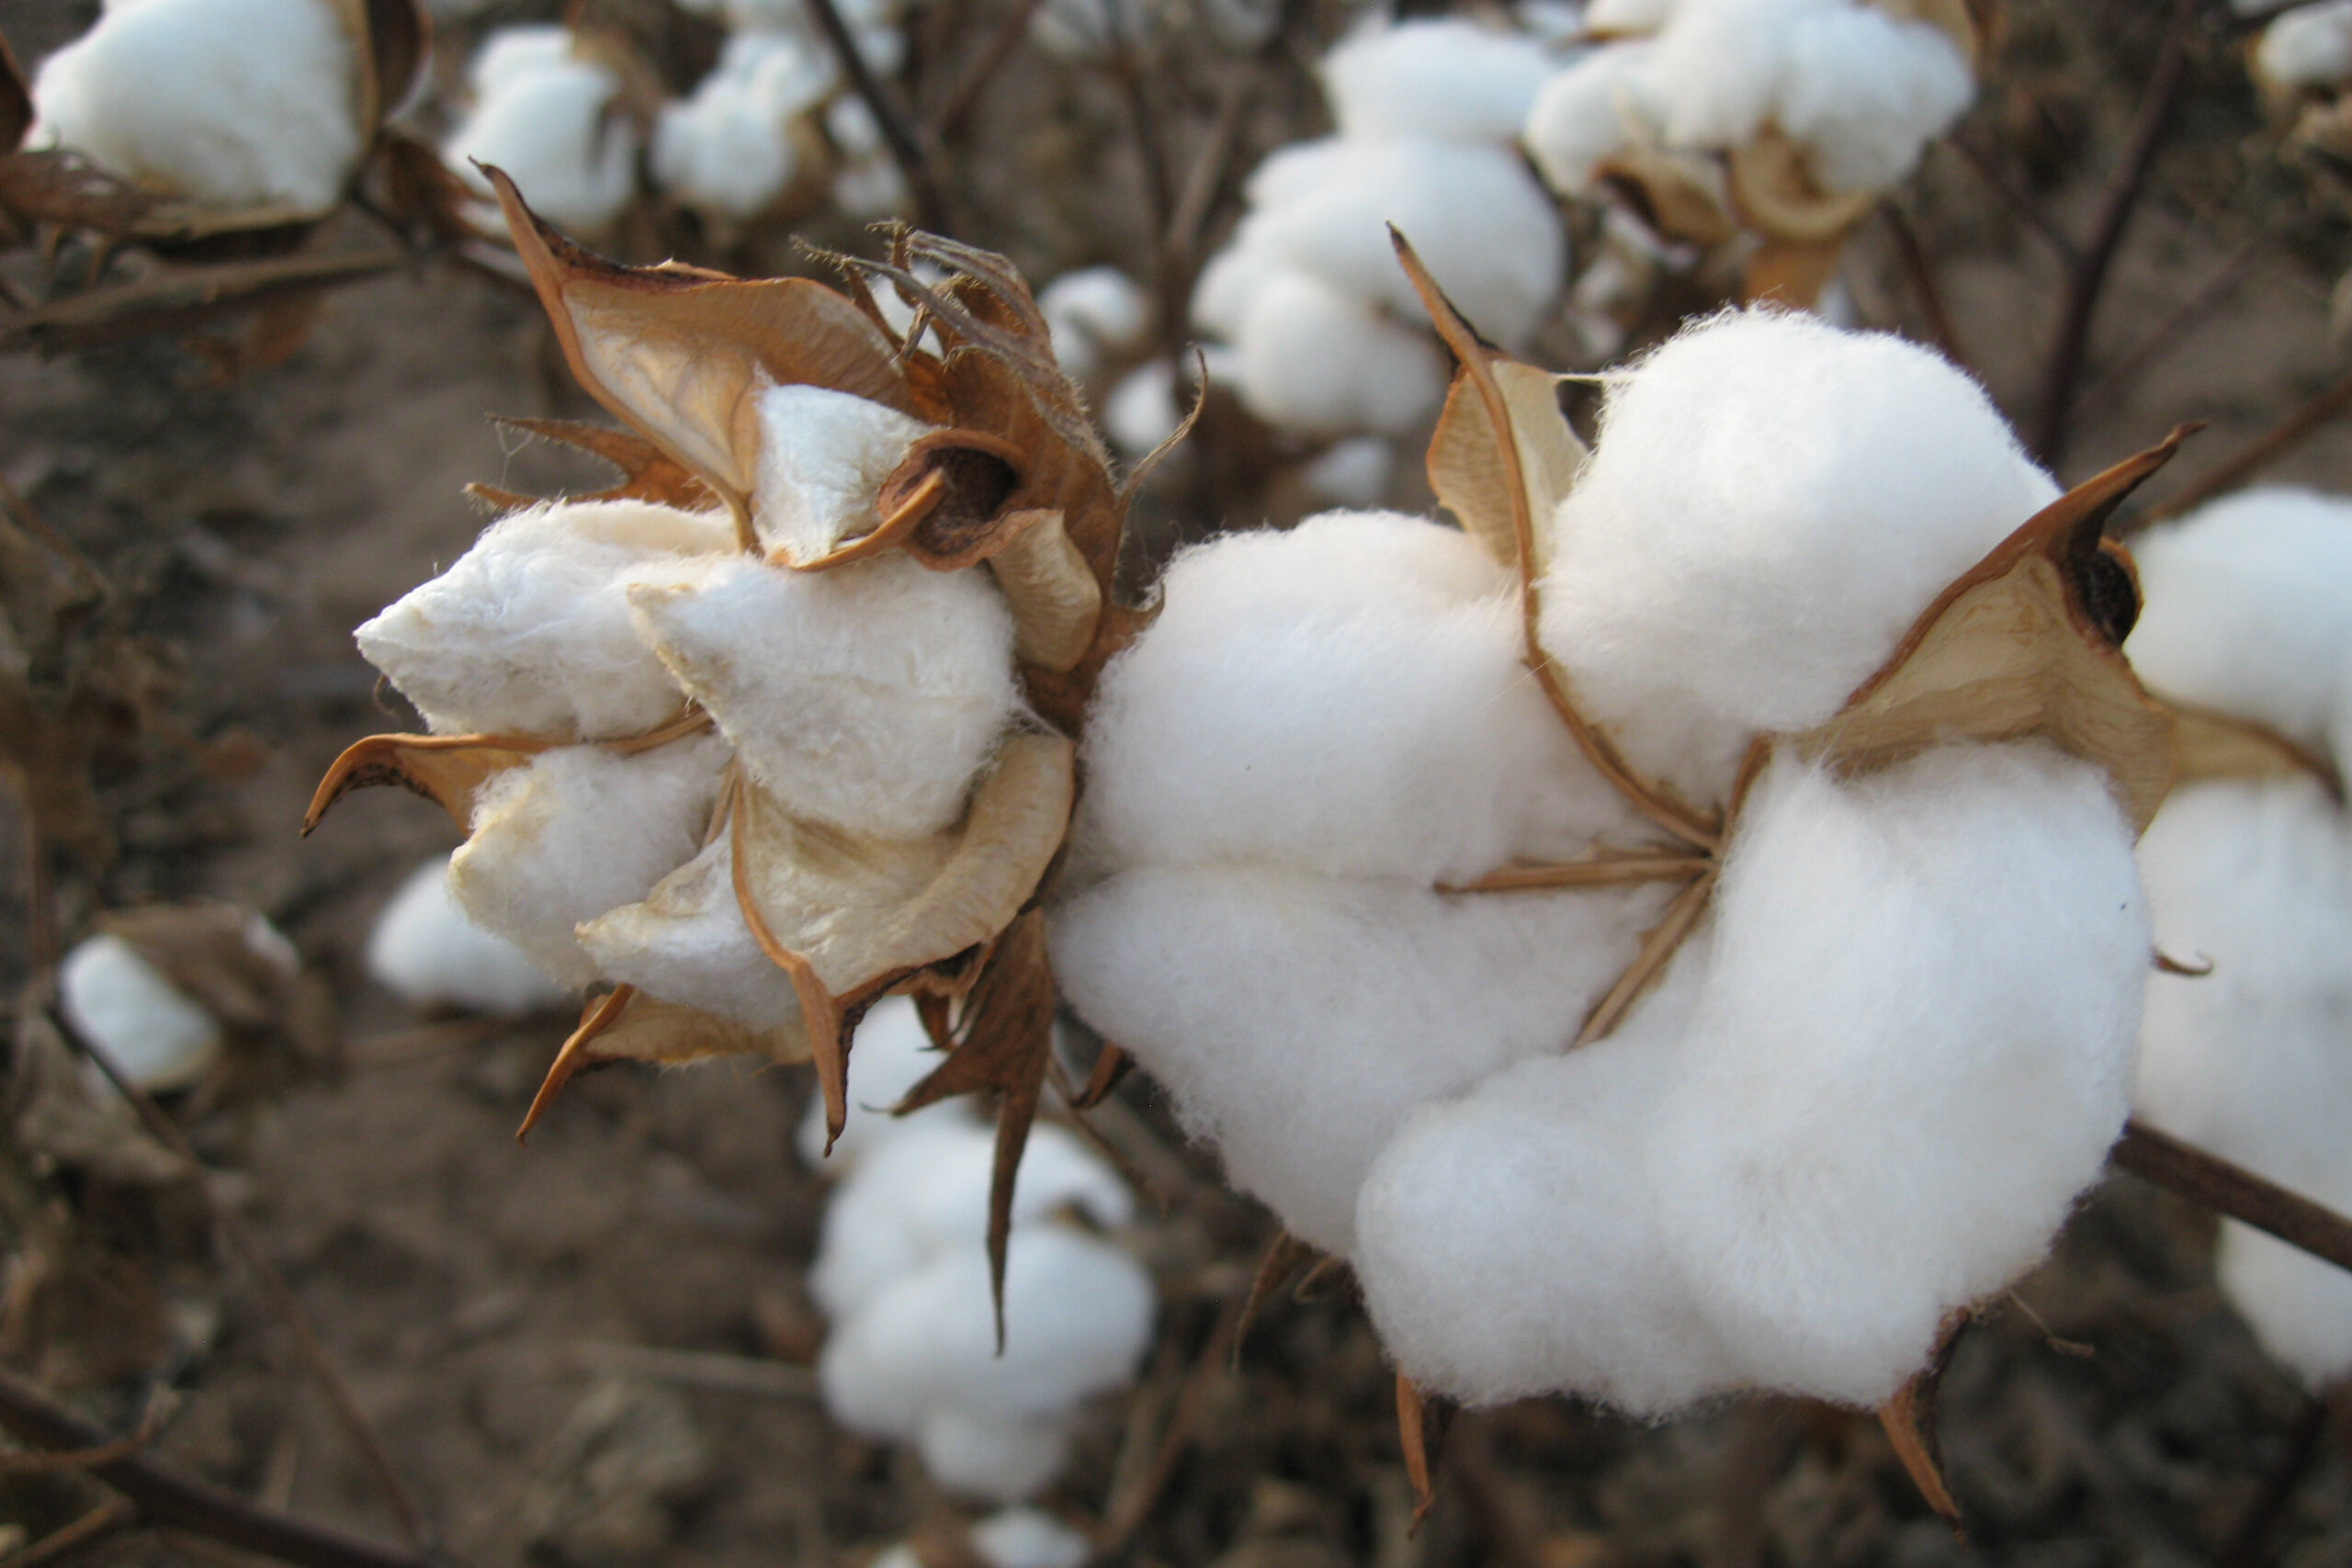 Bouxin: "There could be new interest in importing non-GM cottonseed/meal with the war in Ukraine and the difficulties involved in importing non-GM sunflower meal." - Photo: Wikimedia